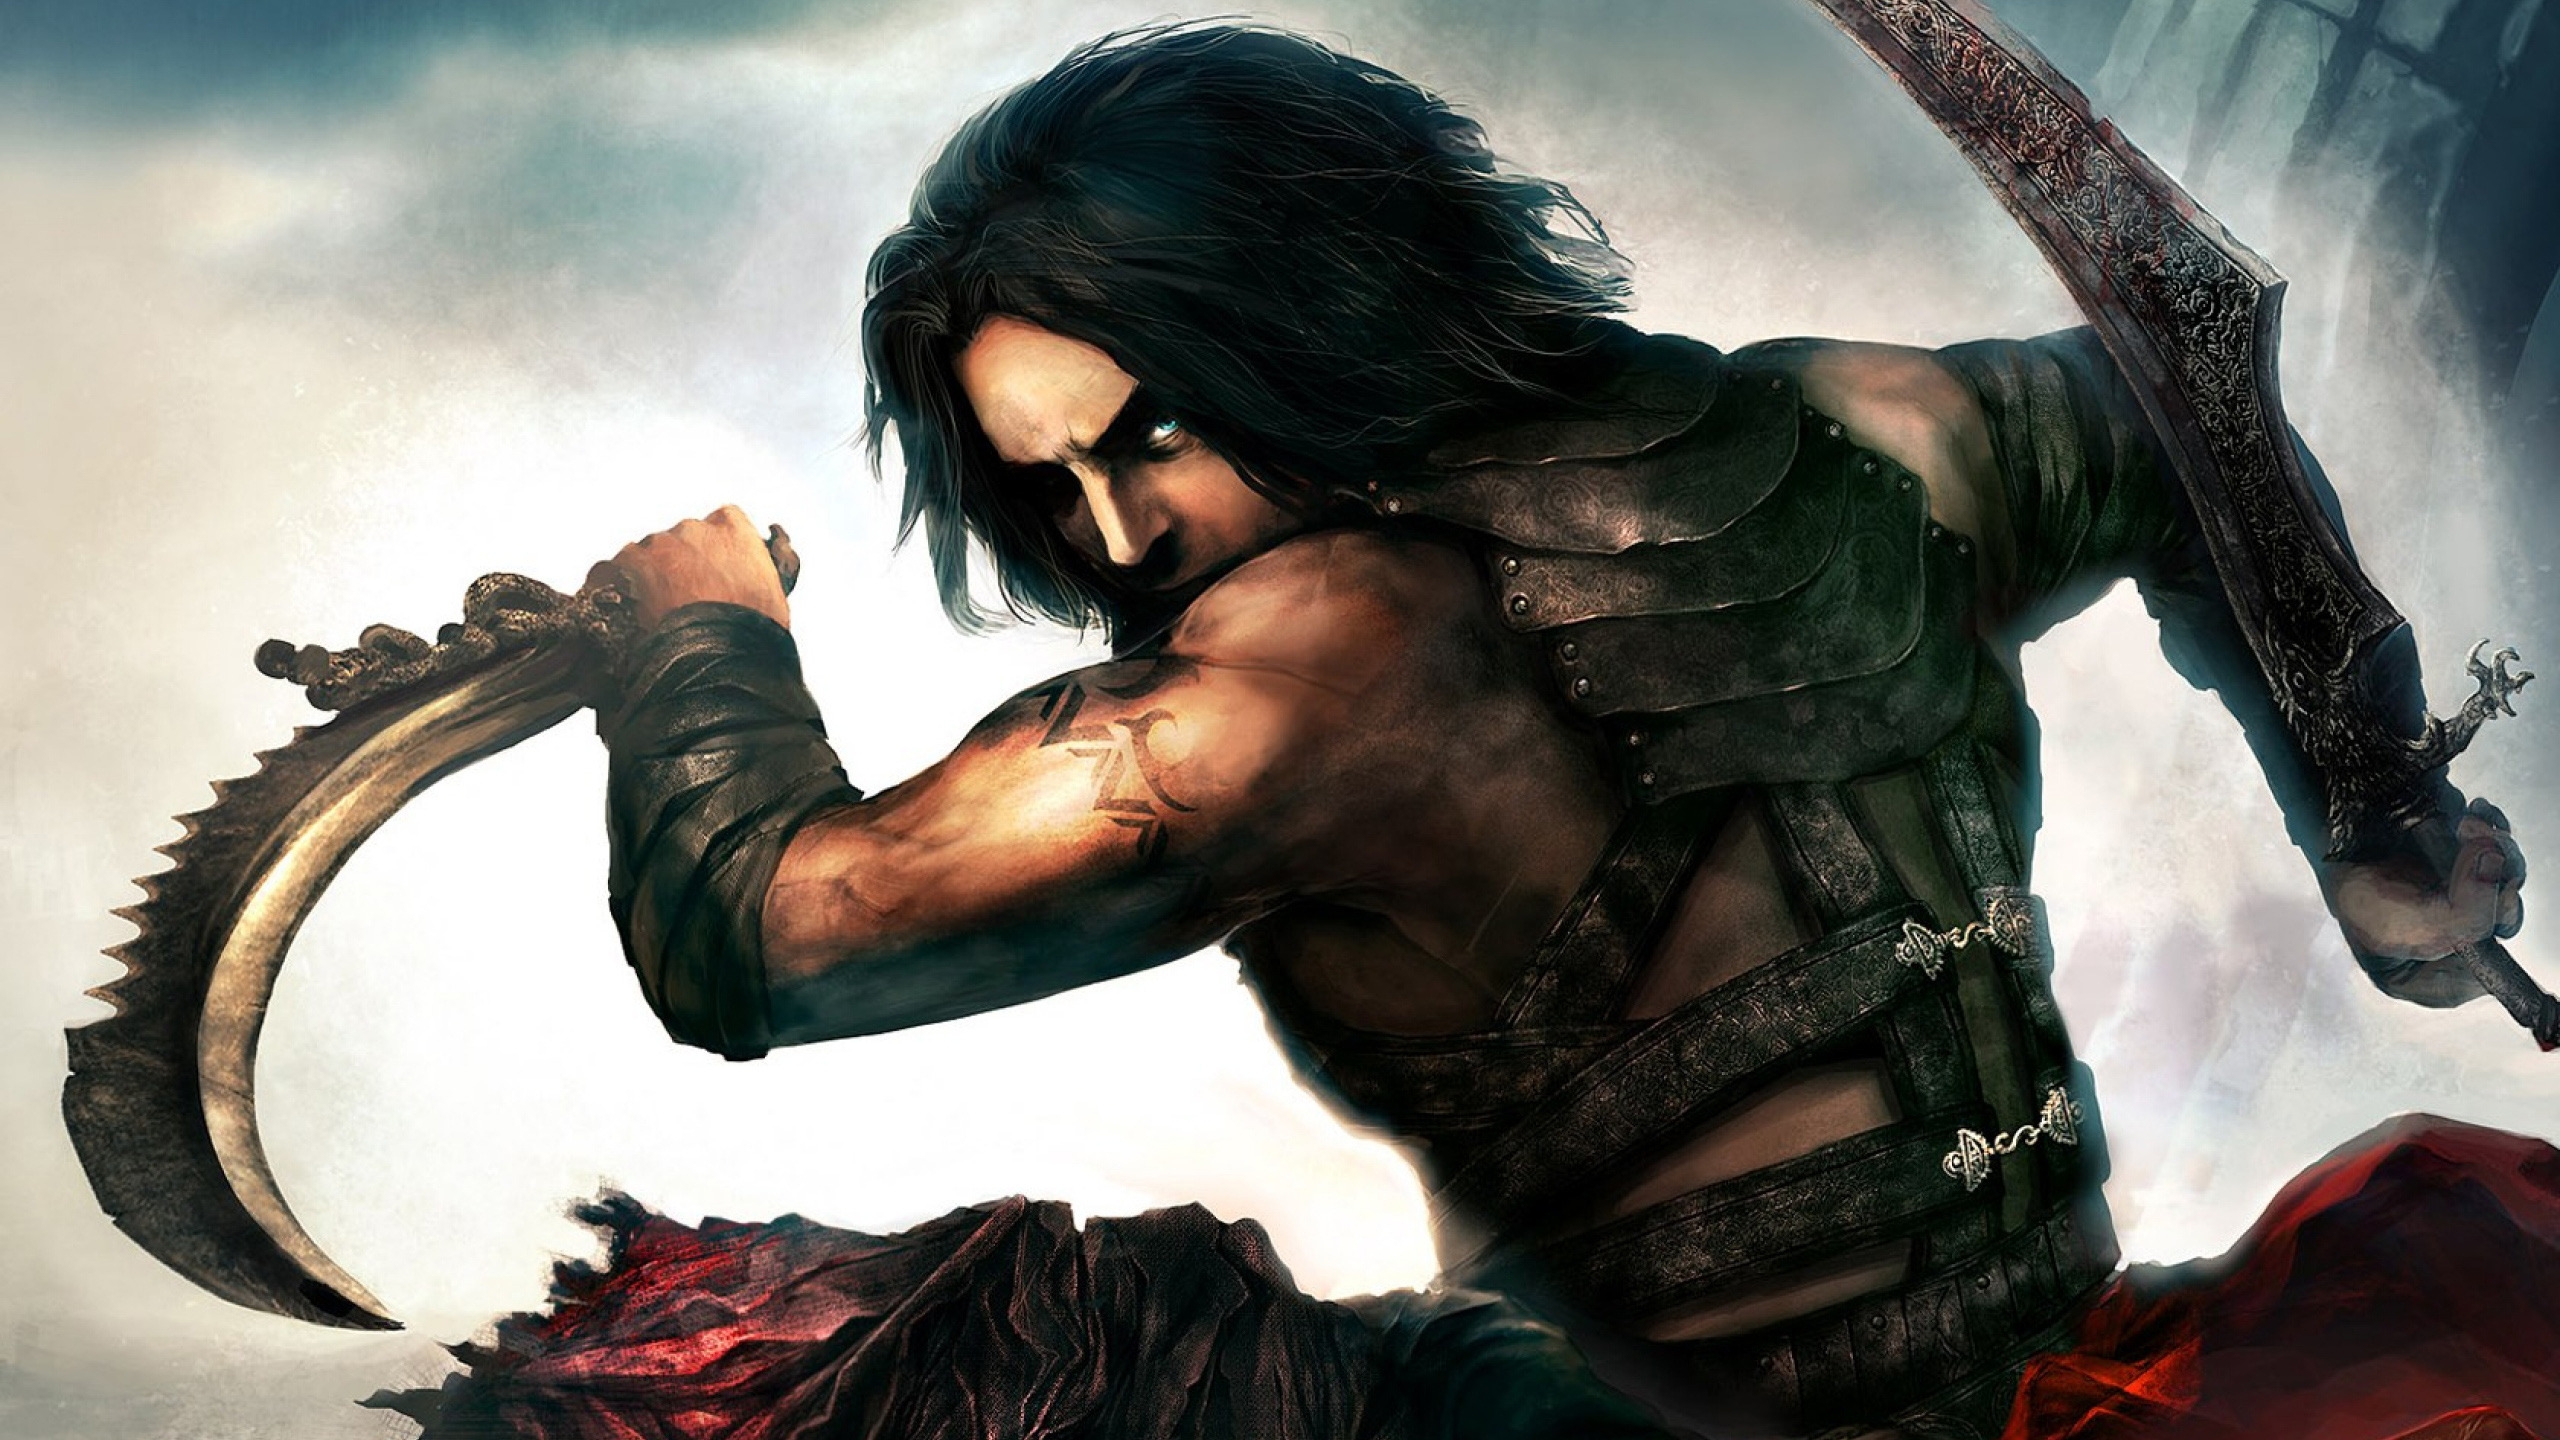 Prince of Persia Warrior Within for 2560x1440 HDTV resolution